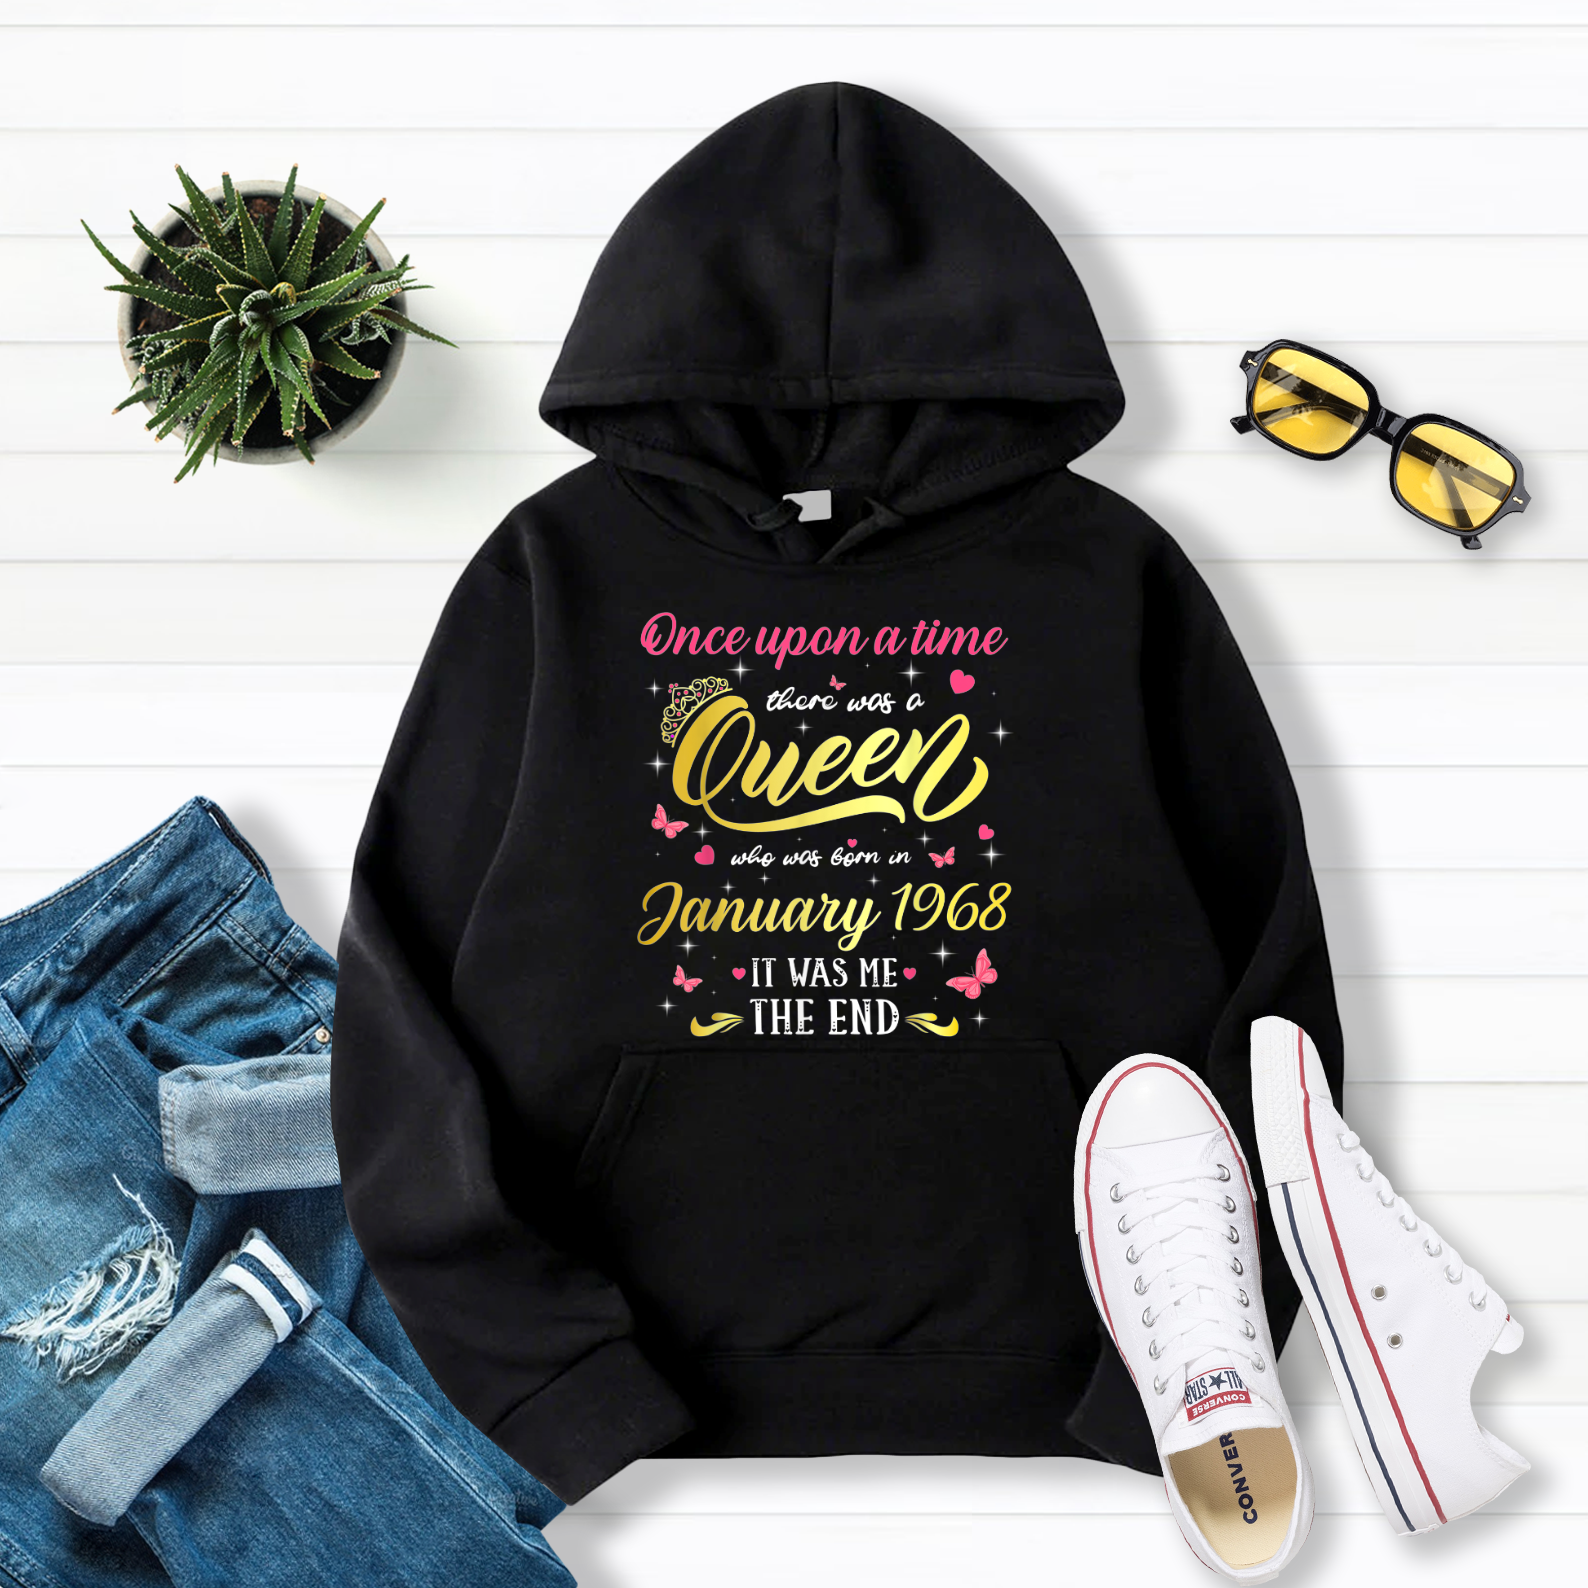 Once Upon A Time There Was A Queen Was Born In January 1968 Pullover Hoodie Black S-5XL